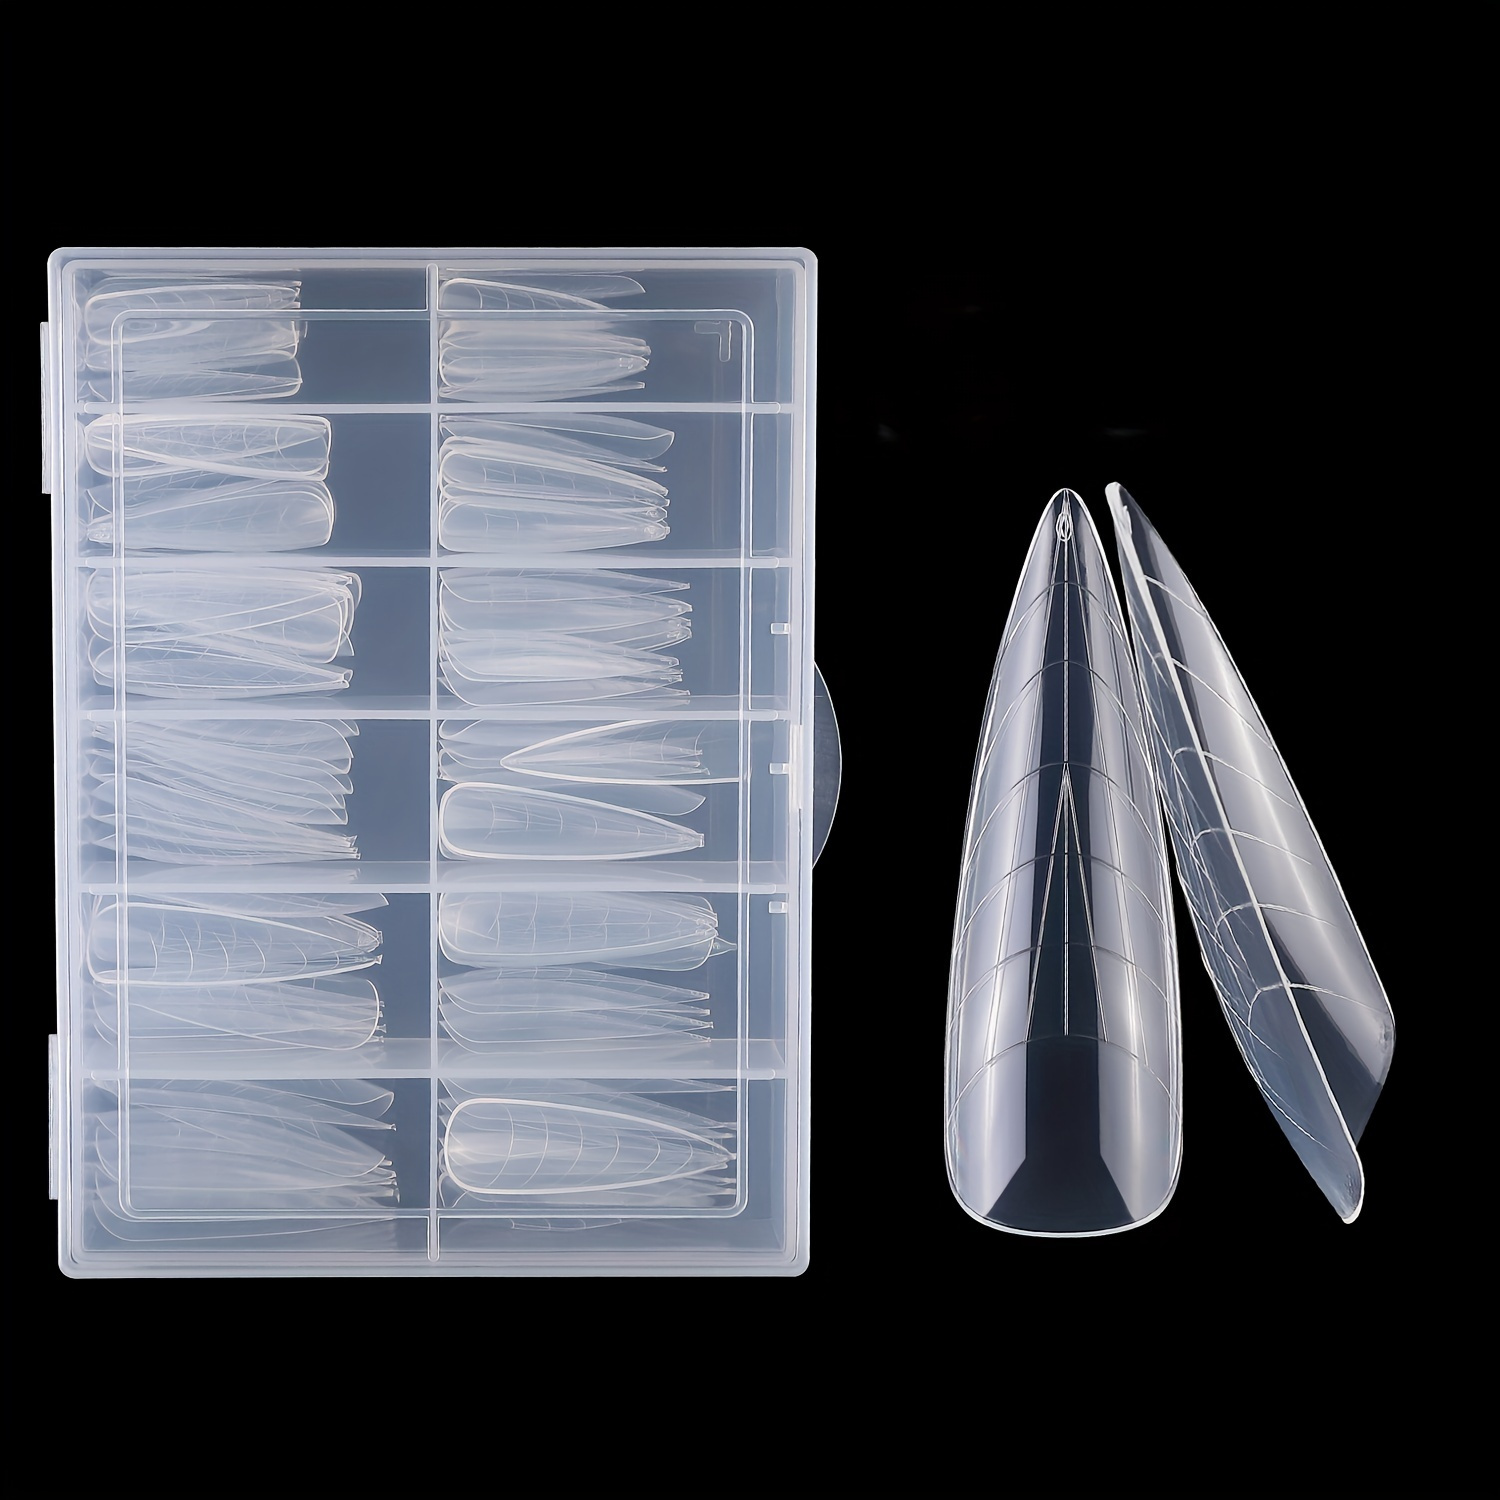 

120 Pcs Dual System Nail Form Molds Nail Tips Clear Gel Tools Extension Forms For Acrylic Nails